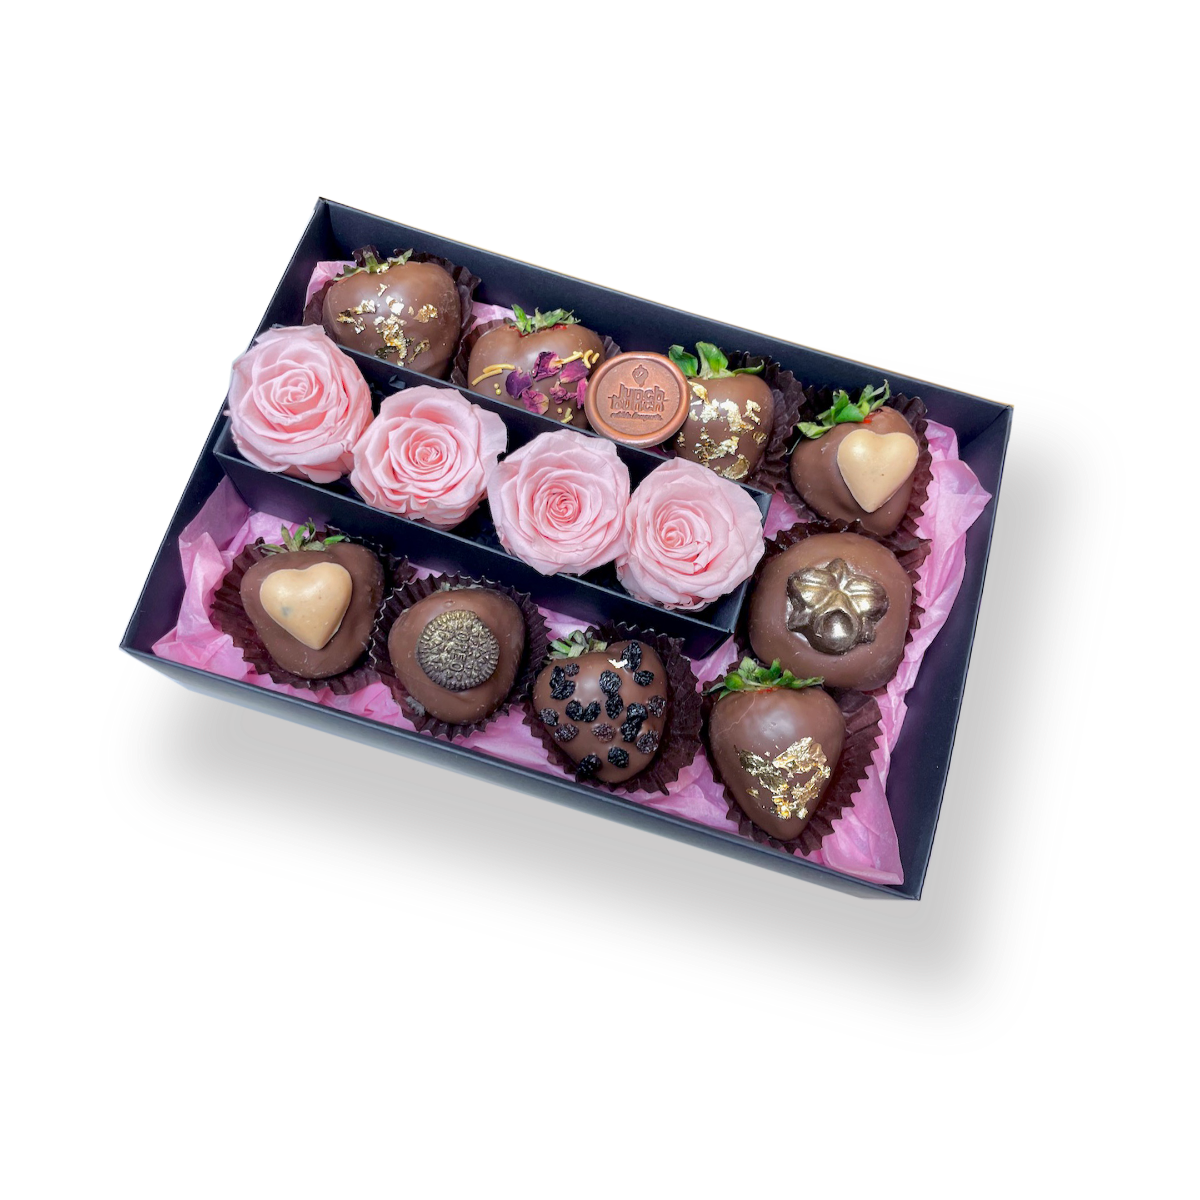 Pink Preserved Roses, Chocolate Strawberries & Donuts Box, Same day adelaide delivery, dessert box delivery, girly gift, 